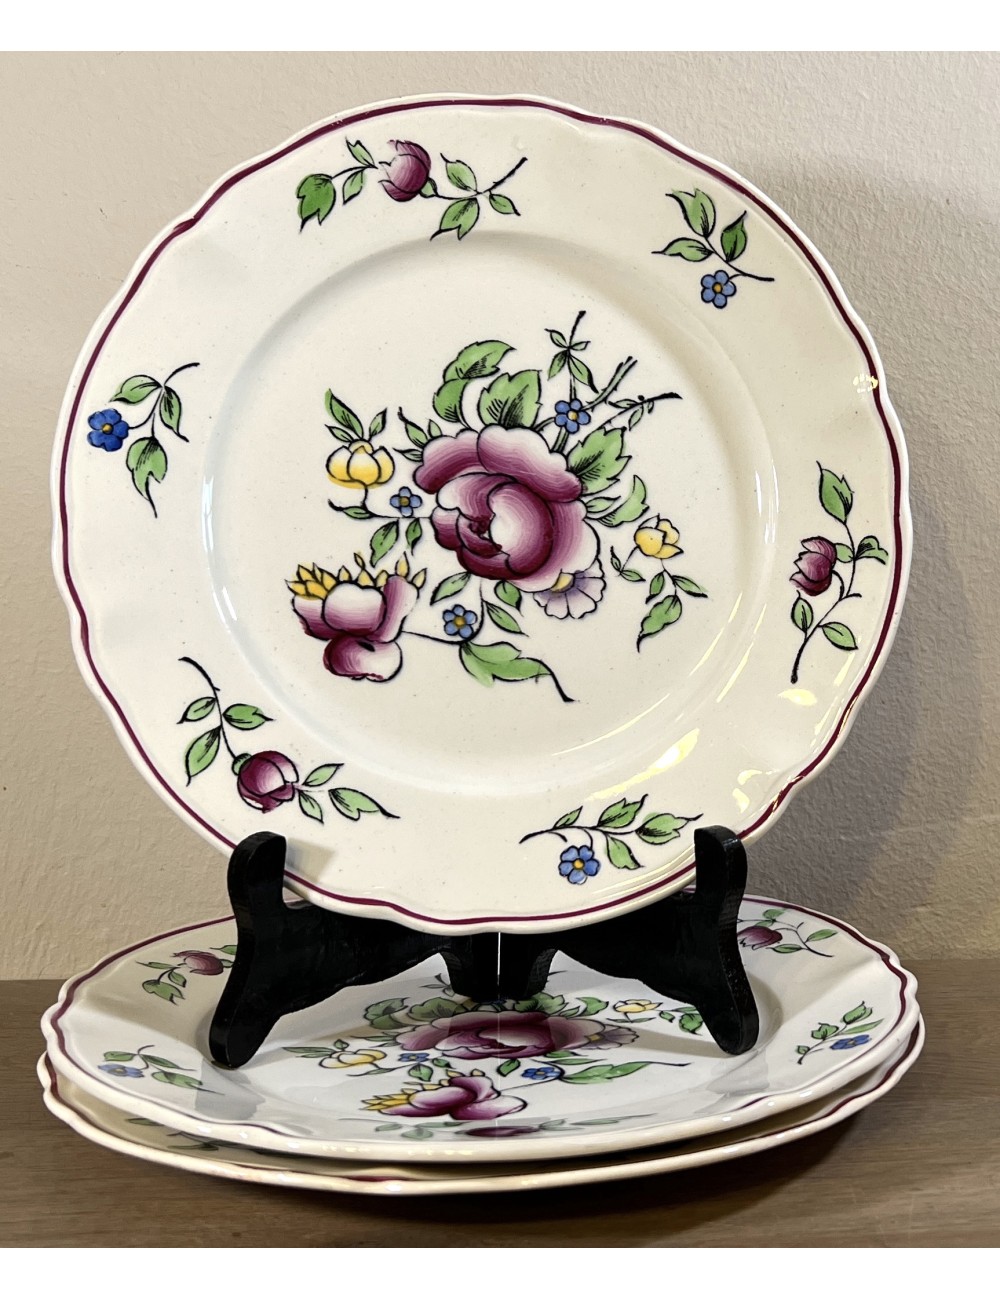 Breakfast plate / Dessert plate - Boch - décor of a pink rose with with blue and yellow flowers